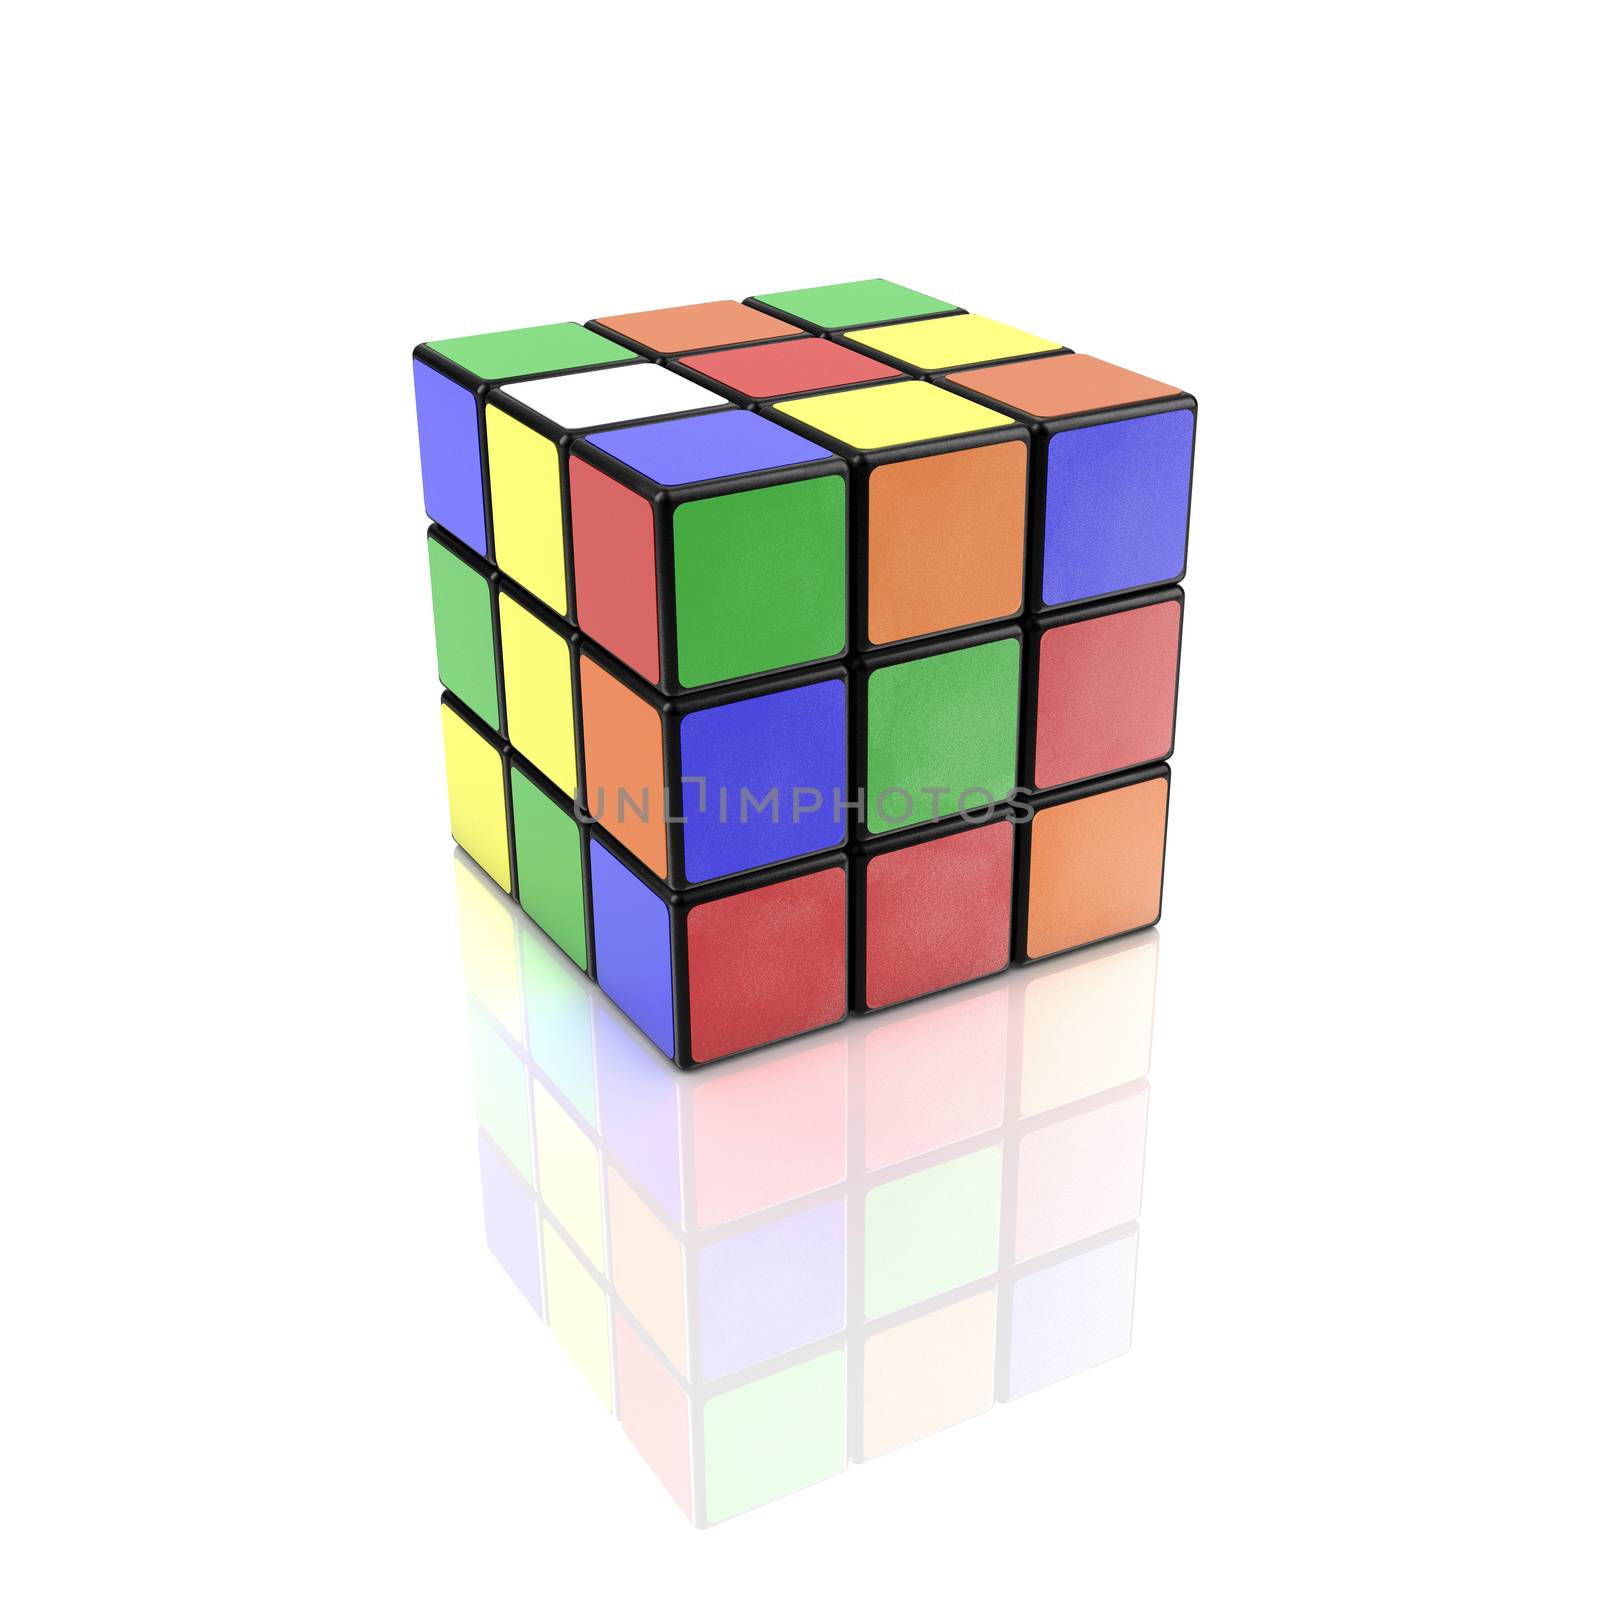 Famous Rubik's cube with mixed colors over white background